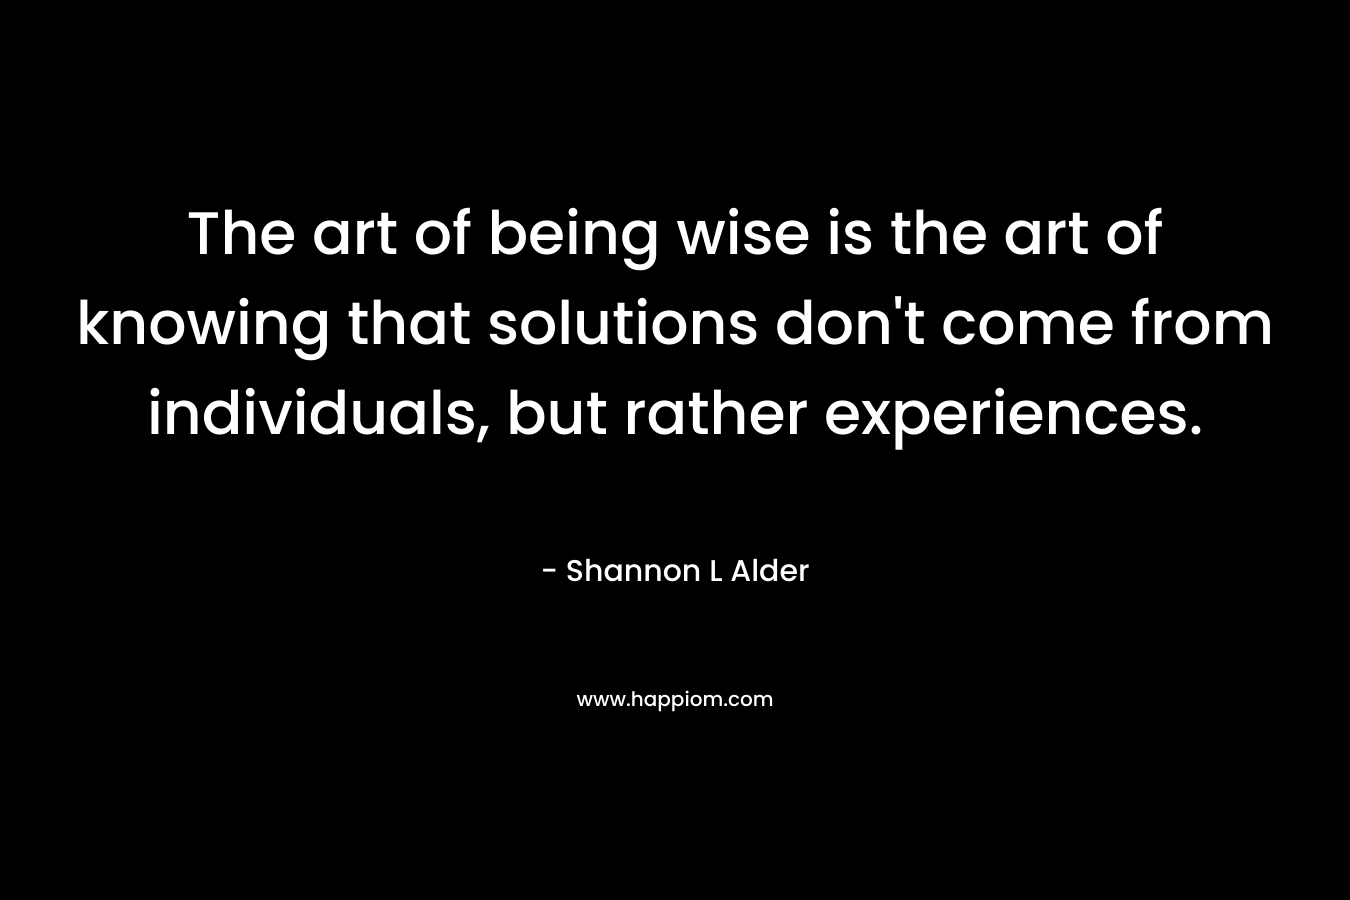 The art of being wise is the art of knowing that solutions don't come from individuals, but rather experiences.